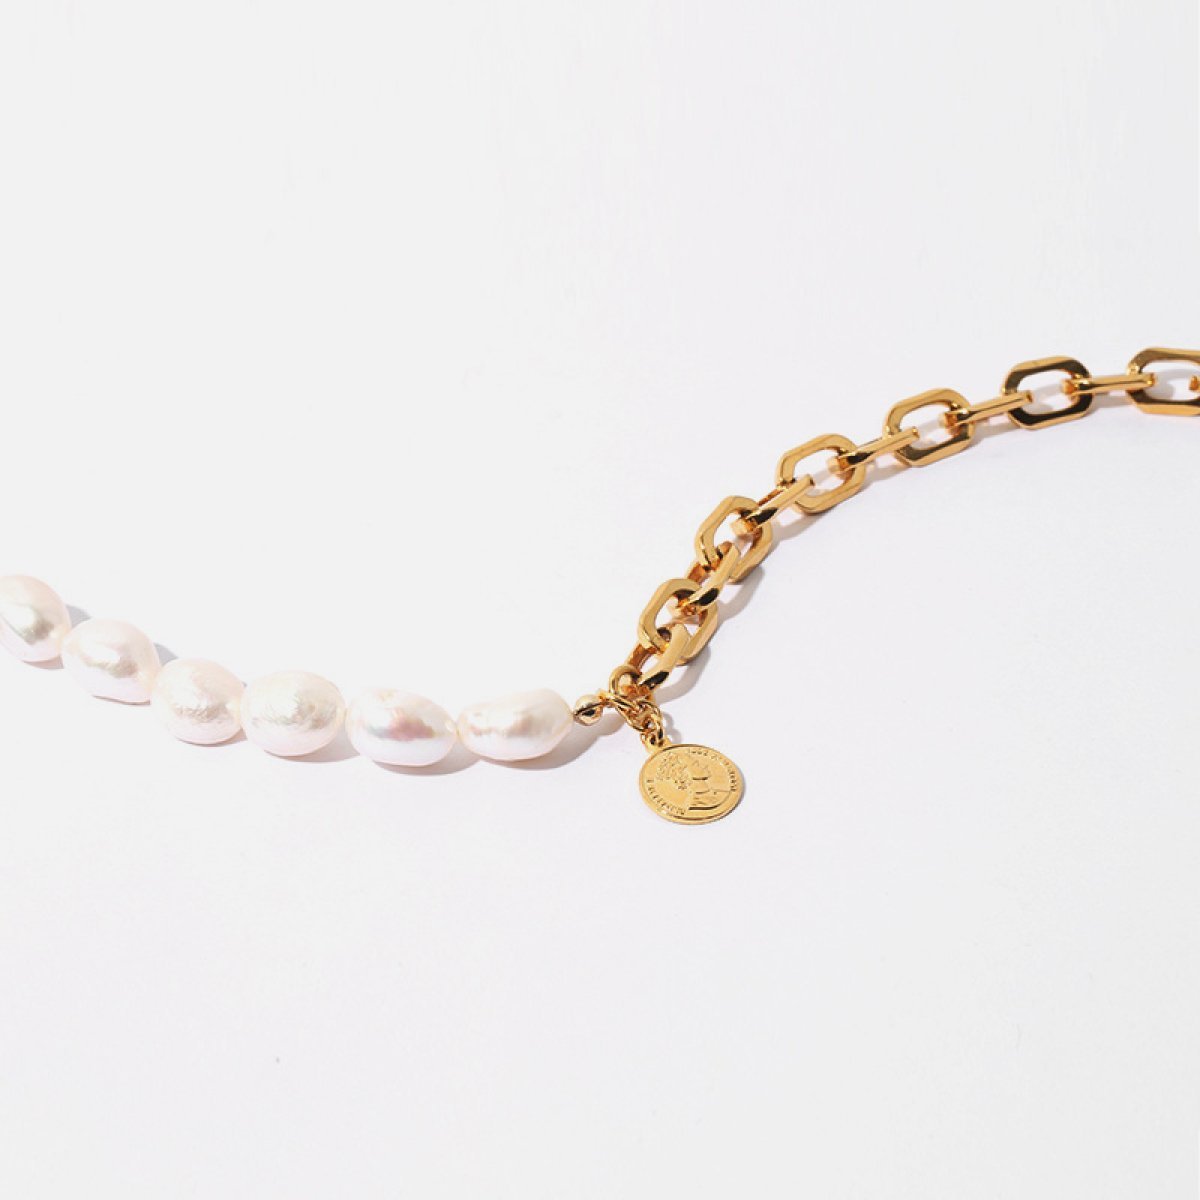 Half Chain Half Pearl Necklace With Coin and 50 similar items